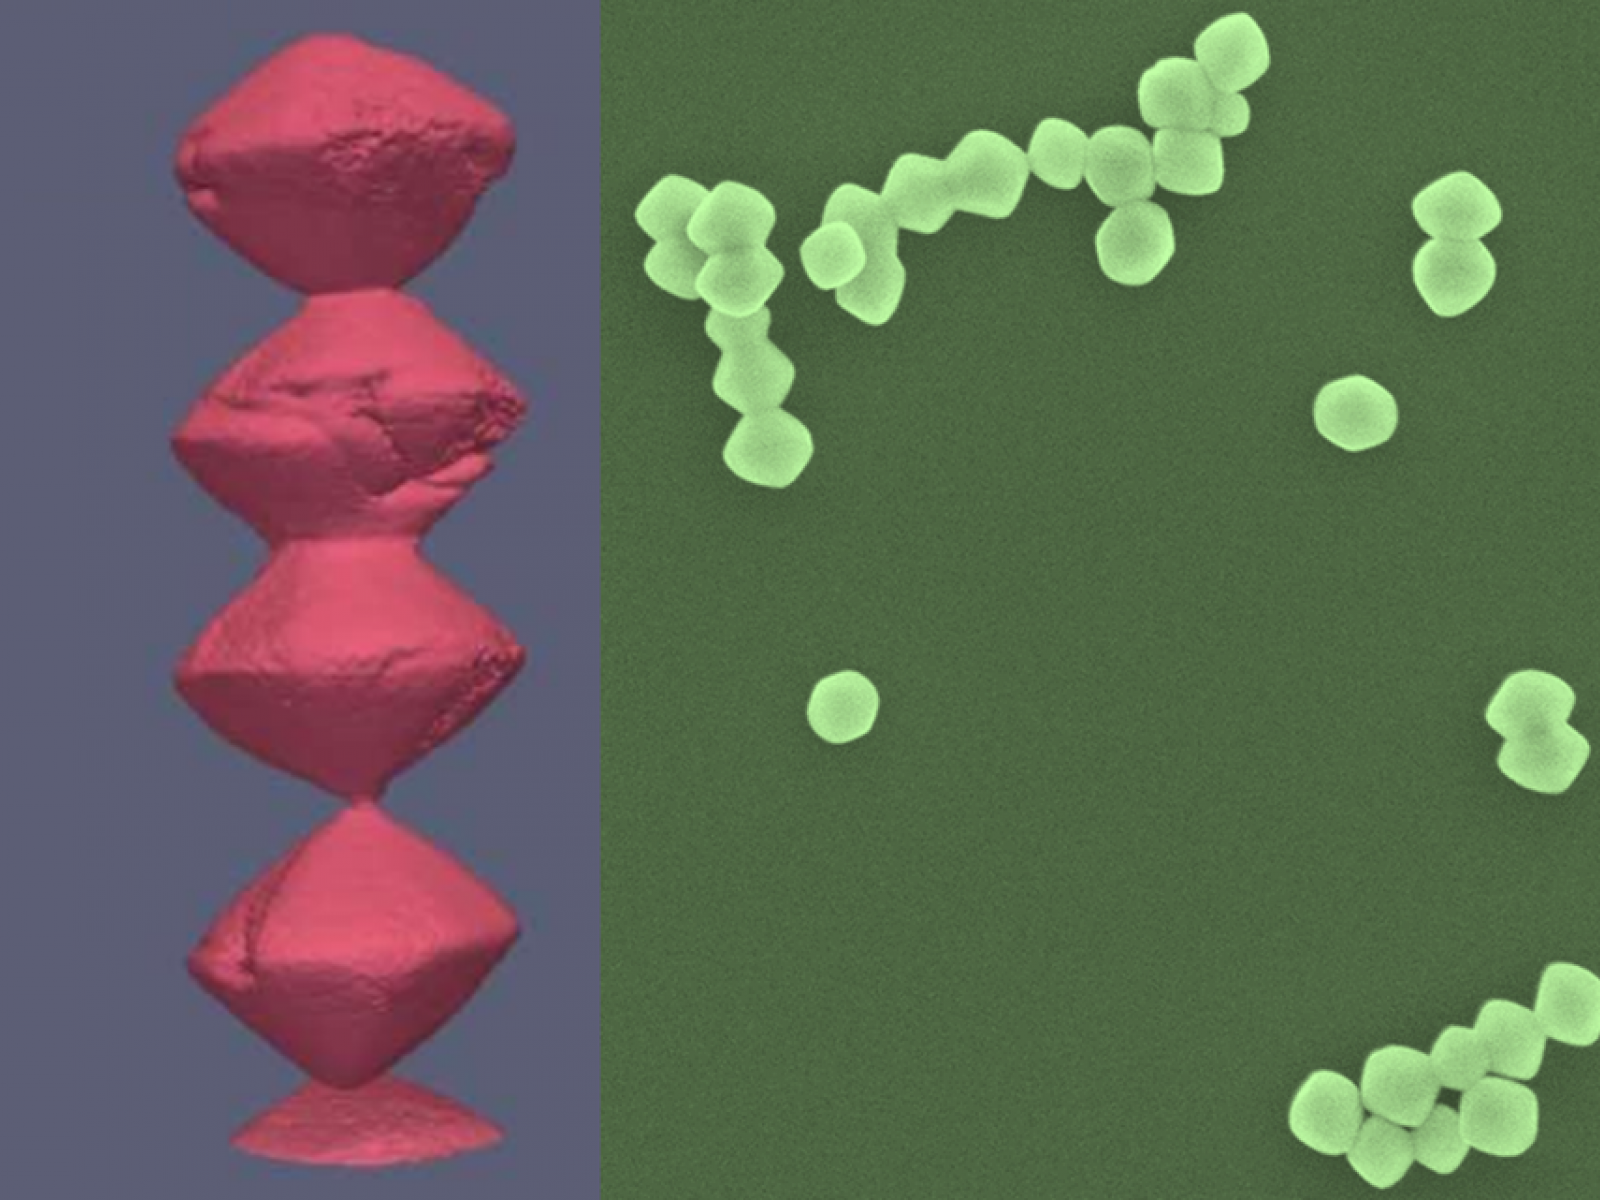 Two panel image with a close up on a line of fused nanocrystals on the left and a zoomed out view of multiple sets of fused nanocrystals on the right.